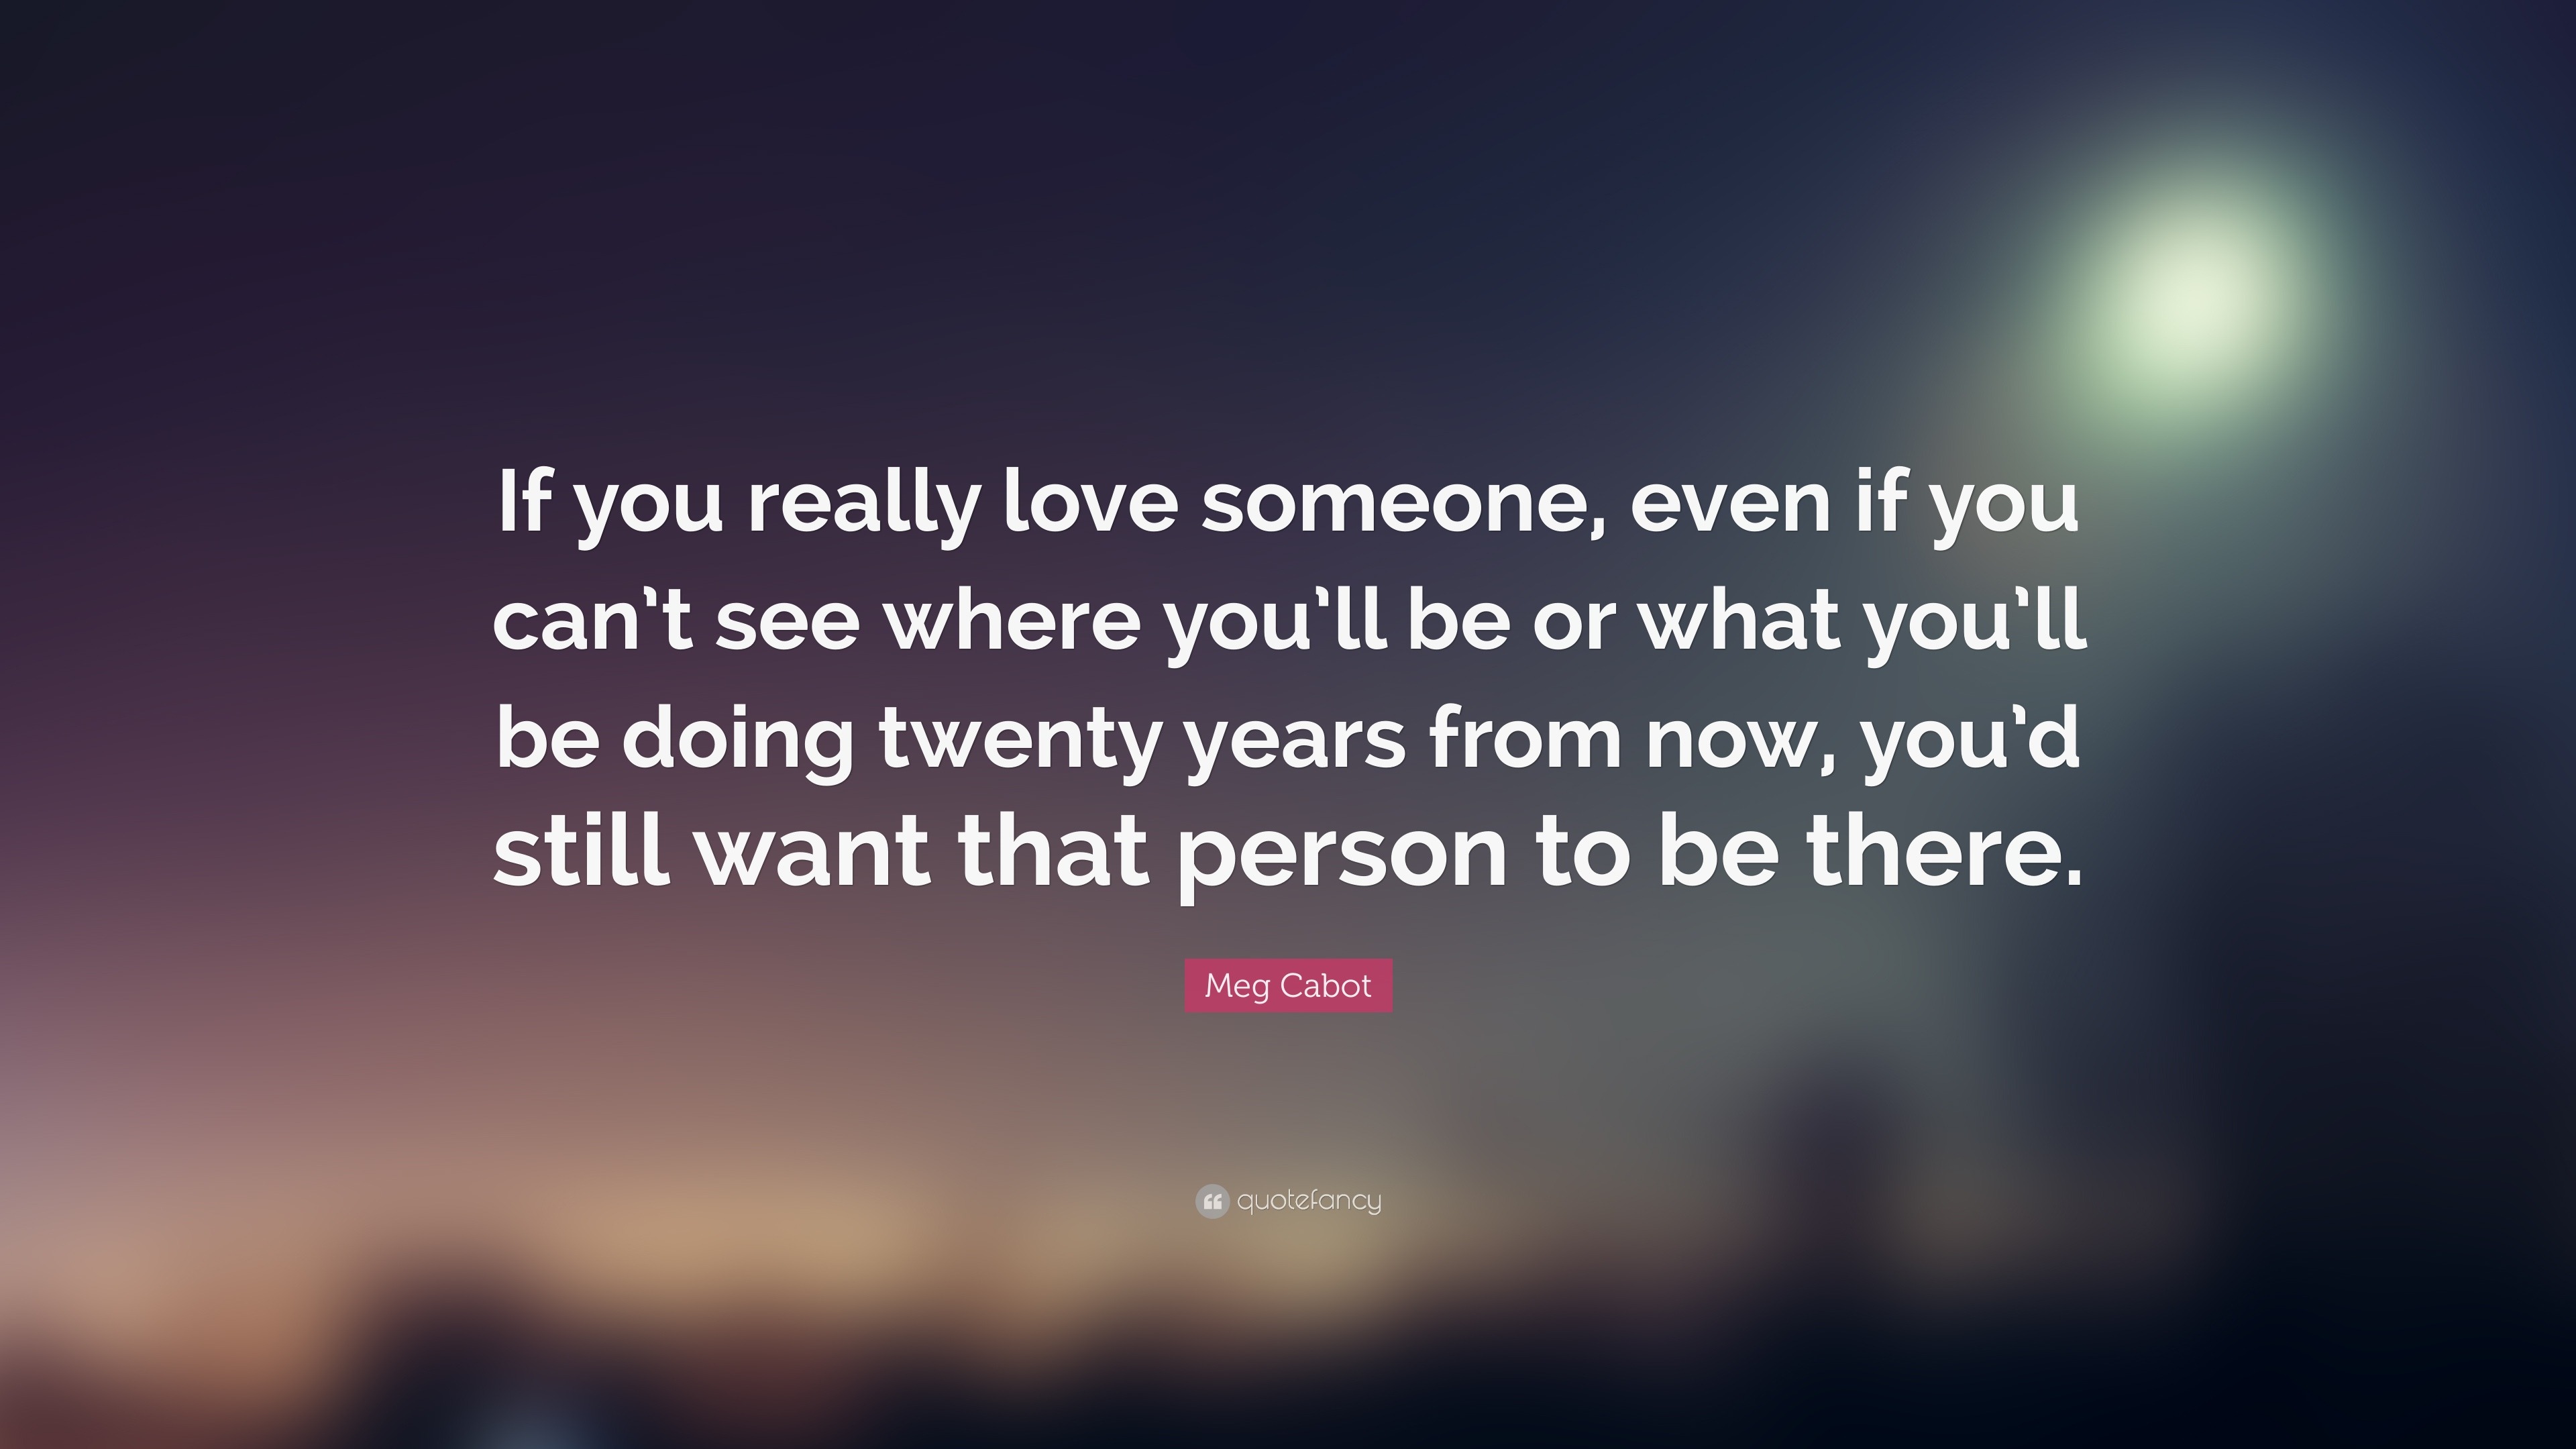 Meg Cabot Quote “If you really love someone even if you can